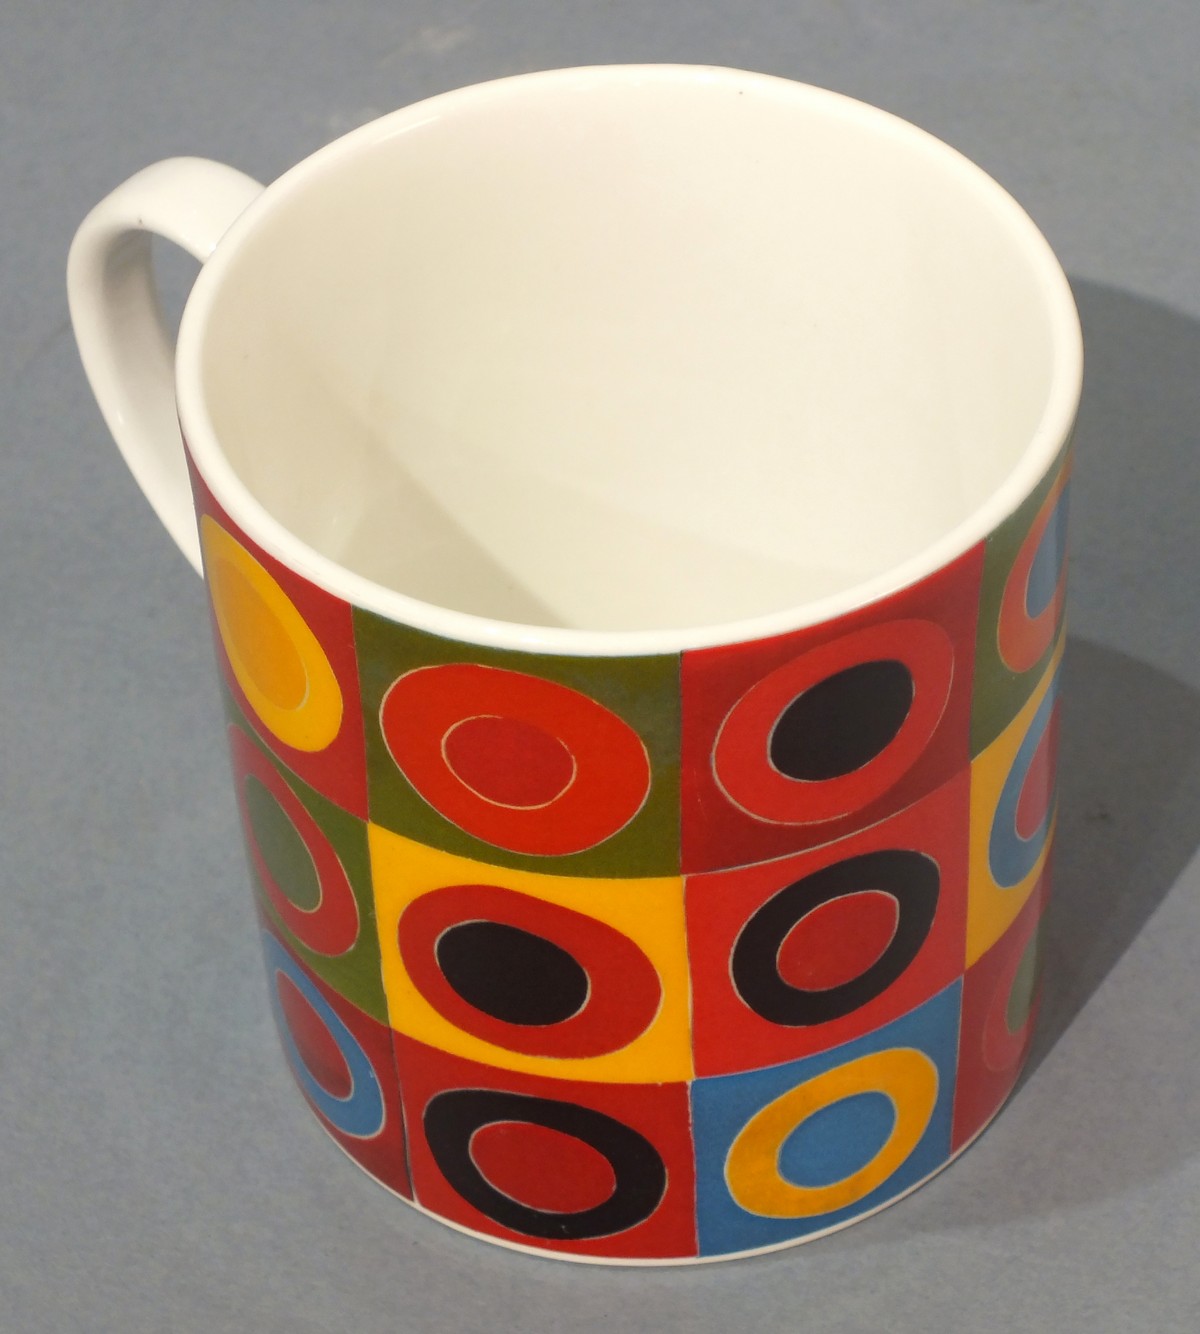 Sir Terry FROST (British 1915-2003) Orchard Tambourine Mug (on behalf of Royal Academy of Arts), - Image 2 of 10